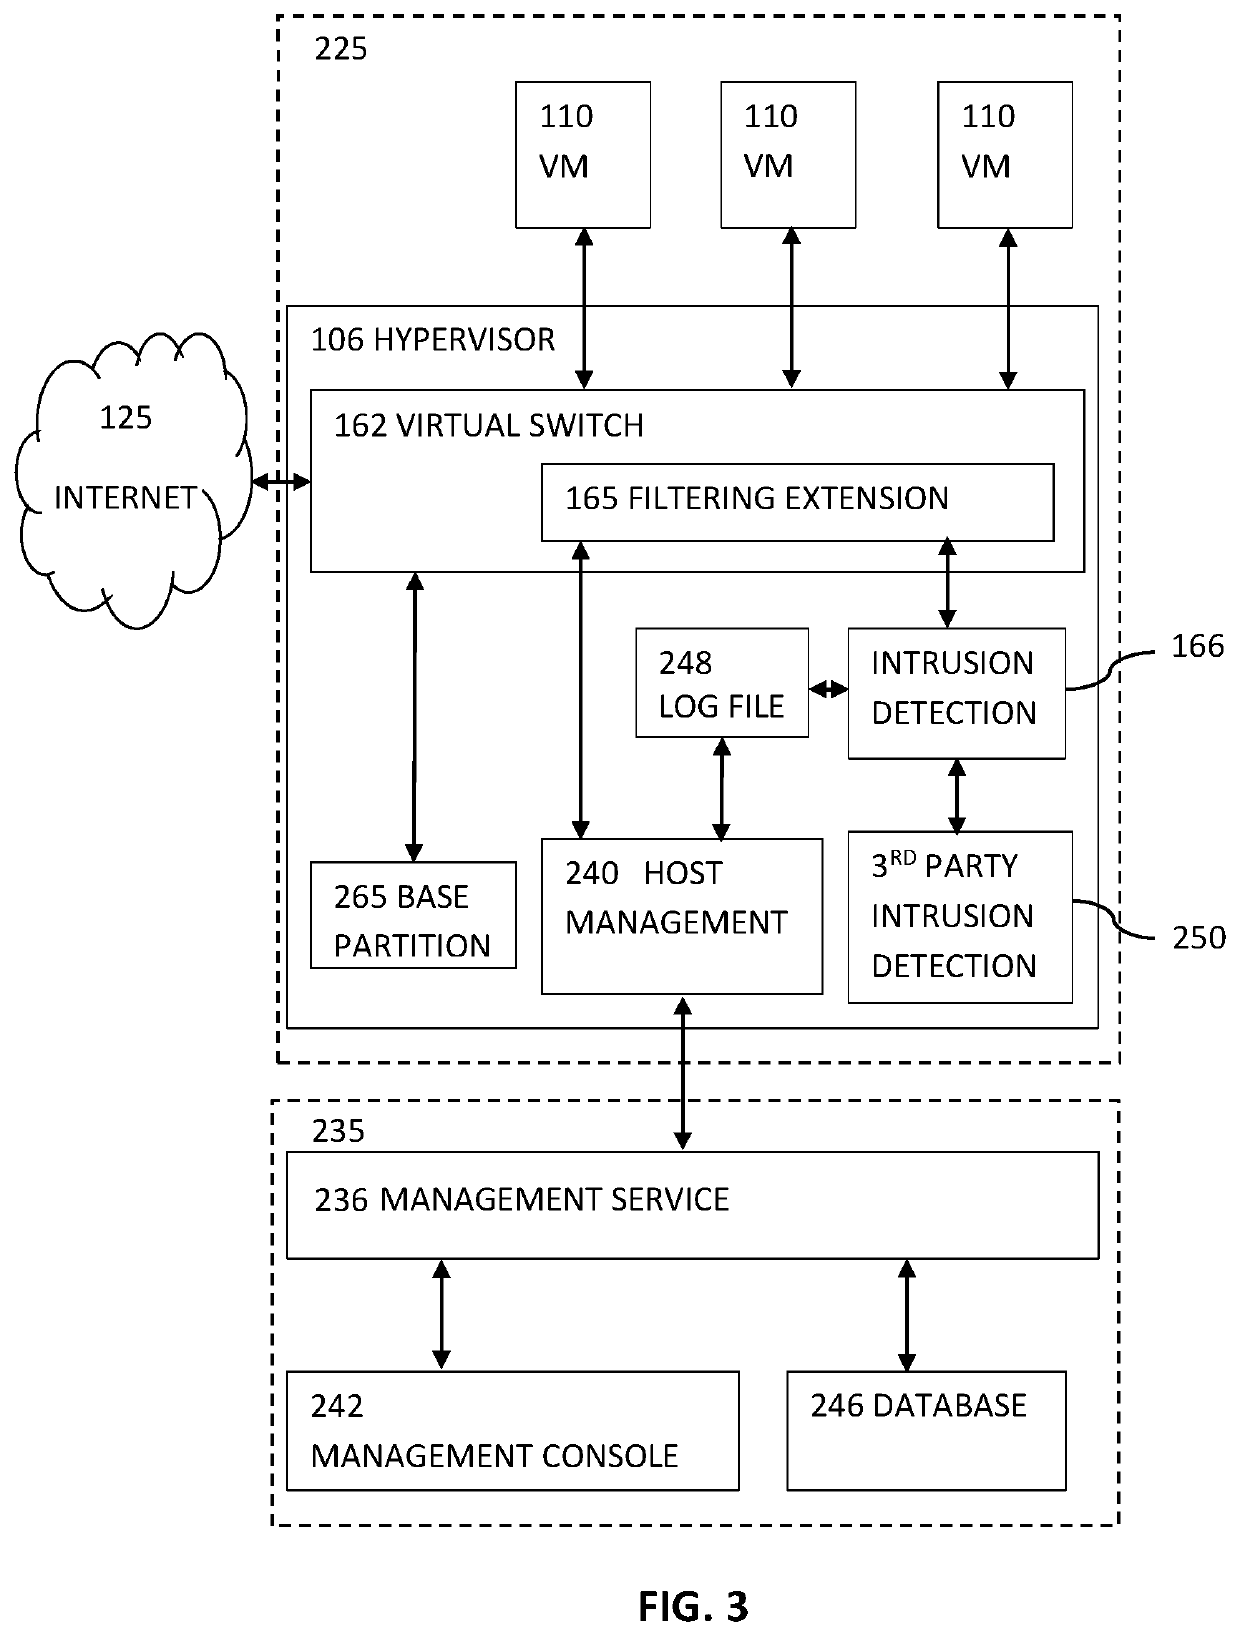 Agentless security of virtual machines using a network interface controller